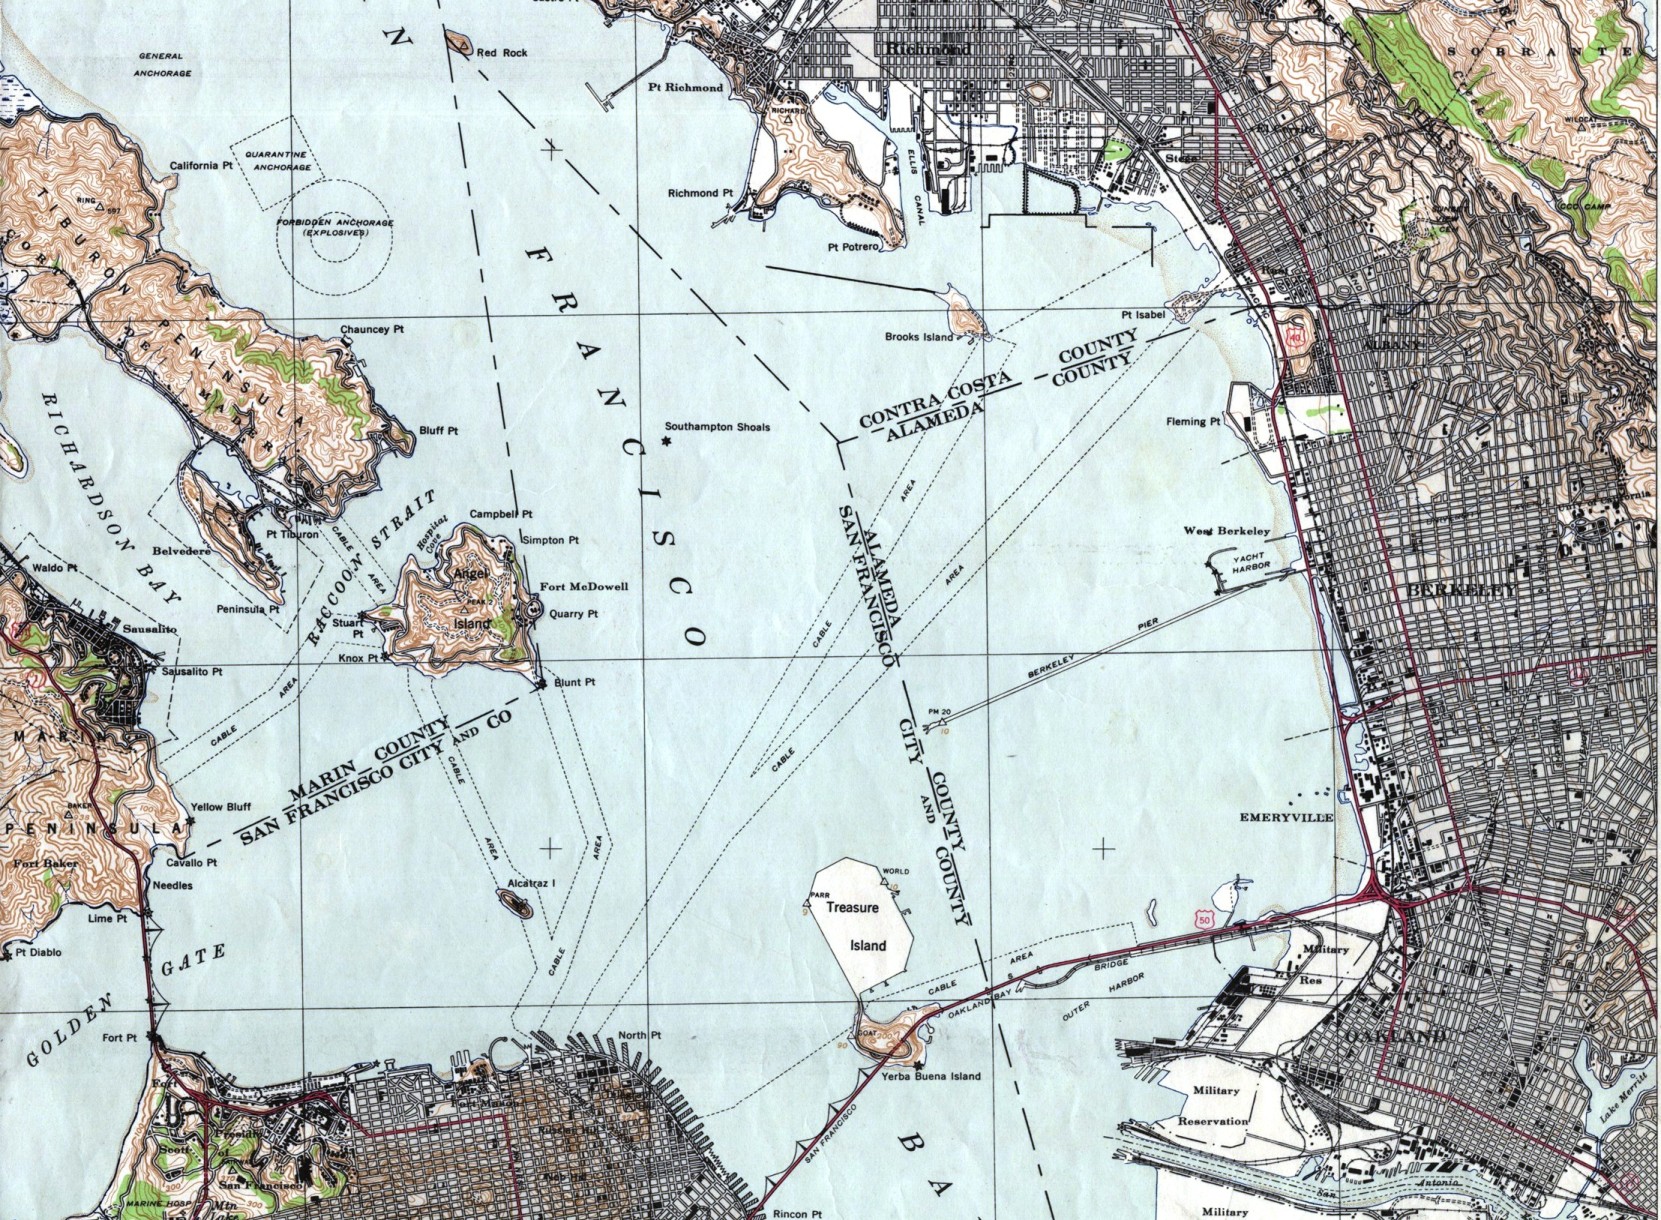 Excerpt from the 1942 United States Army Corps of Engineers map of San Francisco Bay showing the Kaiser Richmond Shipyards at Potrero Point and the Tiburon Naval Net Depot across the bay north of Bluff Point.